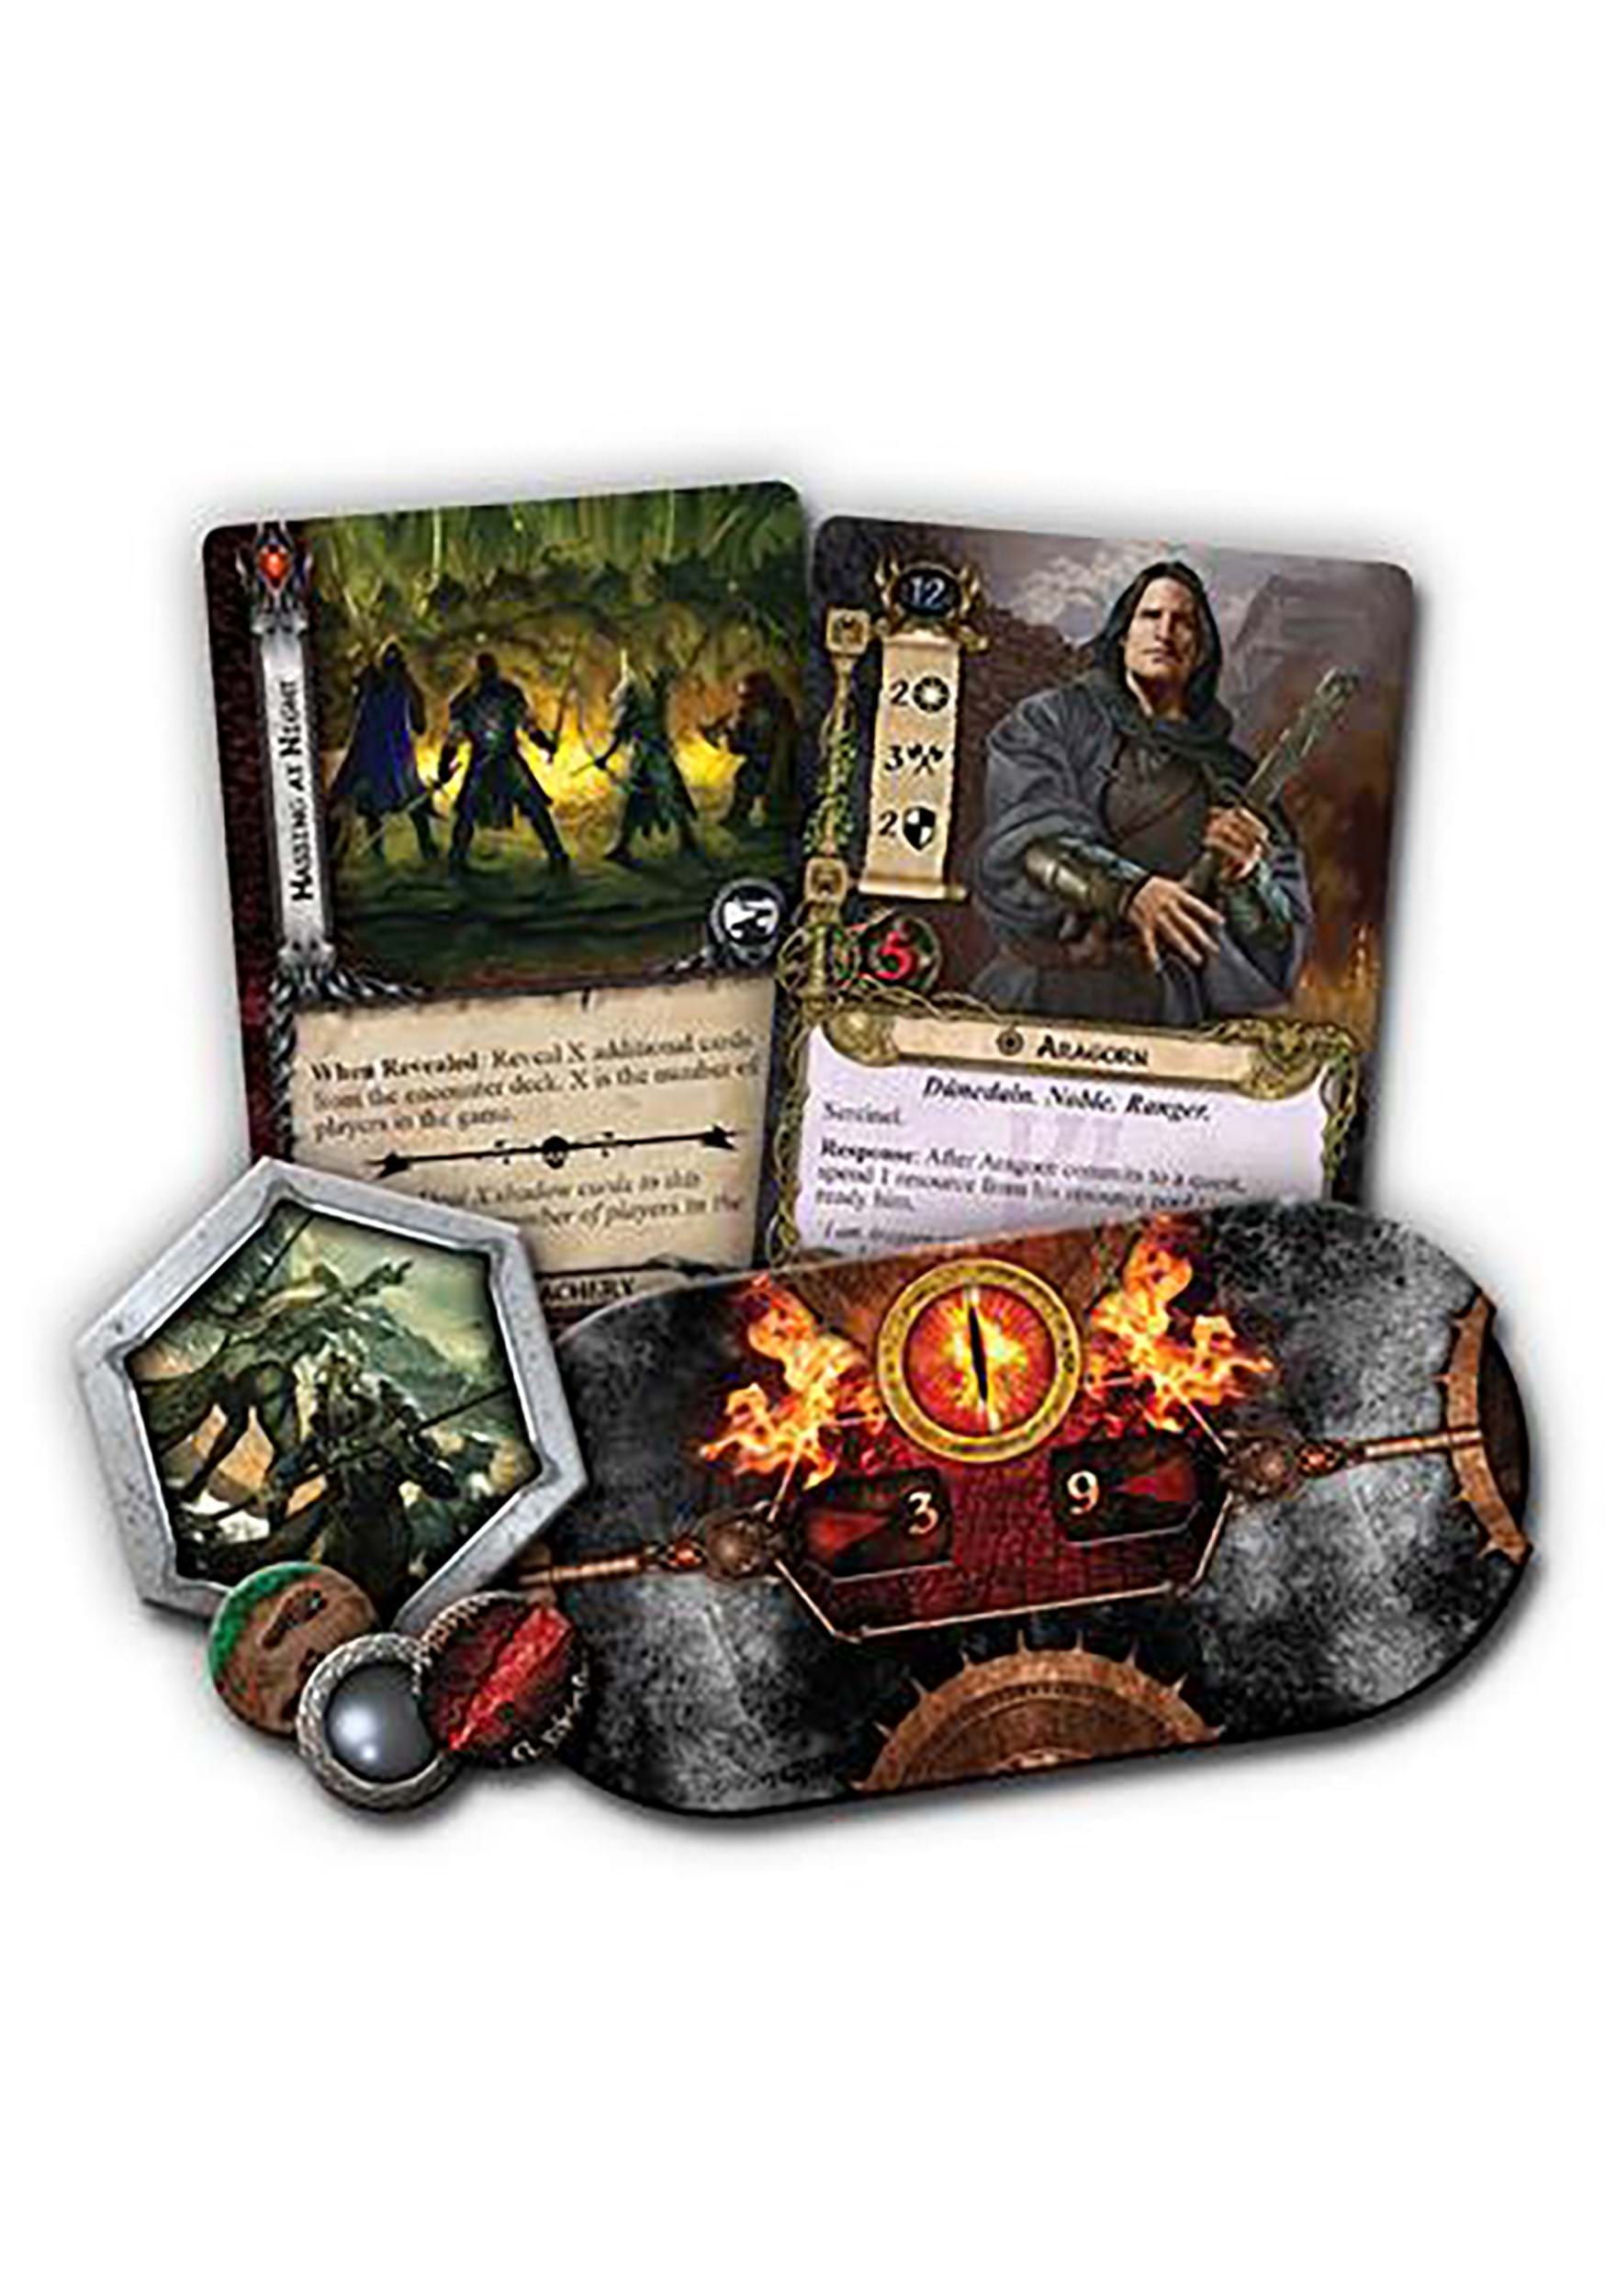 The Lord Of The Rings: The Card Game- Revised Core Set